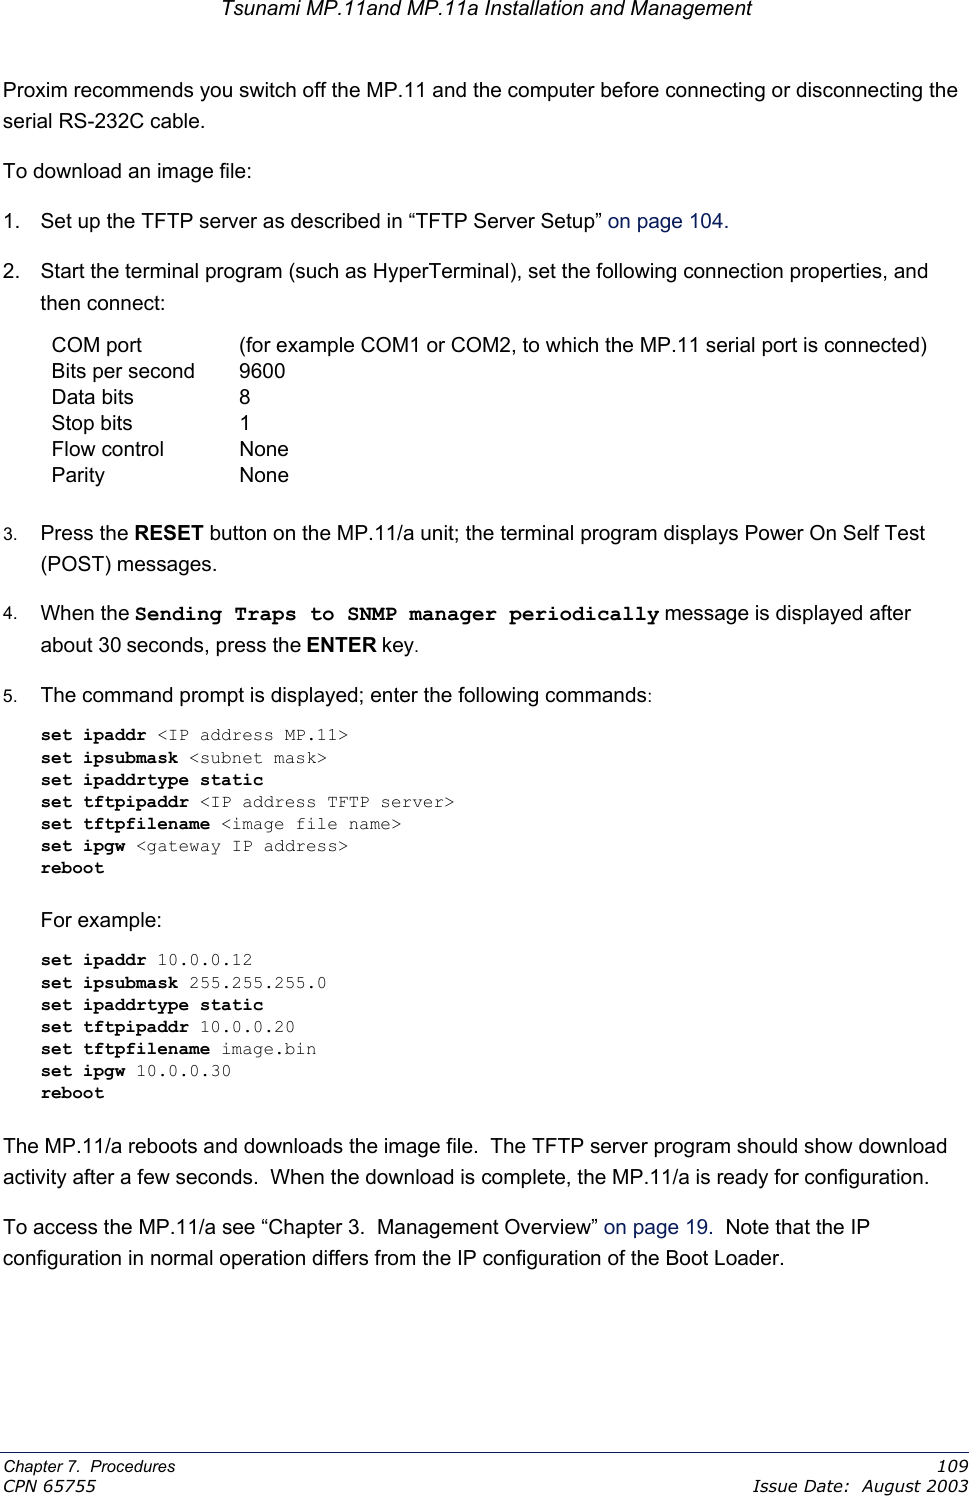 Tsunami MP.11and MP.11a Installation and Management Proxim recommends you switch off the MP.11 and the computer before connecting or disconnecting the serial RS-232C cable. To download an image file: 1.  Set up the TFTP server as described in “TFTP Server Setup” on page 104.  2.  Start the terminal program (such as HyperTerminal), set the following connection properties, and then connect: COM port  (for example COM1 or COM2, to which the MP.11 serial port is connected) Bits per second  9600 Data bits  8 Stop bits  1 Flow control  None Parity None  3.  Press the RESET button on the MP.11/a unit; the terminal program displays Power On Self Test (POST) messages. 4.  When the Sending Traps to SNMP manager periodically message is displayed after about 30 seconds, press the ENTER key. 5.  The command prompt is displayed; enter the following commands: set ipaddr &lt;IP address MP.11&gt; set ipsubmask &lt;subnet mask&gt; set ipaddrtype static set tftpipaddr &lt;IP address TFTP server&gt; set tftpfilename &lt;image file name&gt; set ipgw &lt;gateway IP address&gt; reboot  For example: set ipaddr 10.0.0.12 set ipsubmask 255.255.255.0 set ipaddrtype static set tftpipaddr 10.0.0.20 set tftpfilename image.bin set ipgw 10.0.0.30 reboot  The MP.11/a reboots and downloads the image file.  The TFTP server program should show download activity after a few seconds.  When the download is complete, the MP.11/a is ready for configuration. To access the MP.11/a see “Chapter 3.  Management Overview” on page 19.  Note that the IP configuration in normal operation differs from the IP configuration of the Boot Loader. Chapter 7.  Procedures    109 CPN 65755    Issue Date:  August 2003 